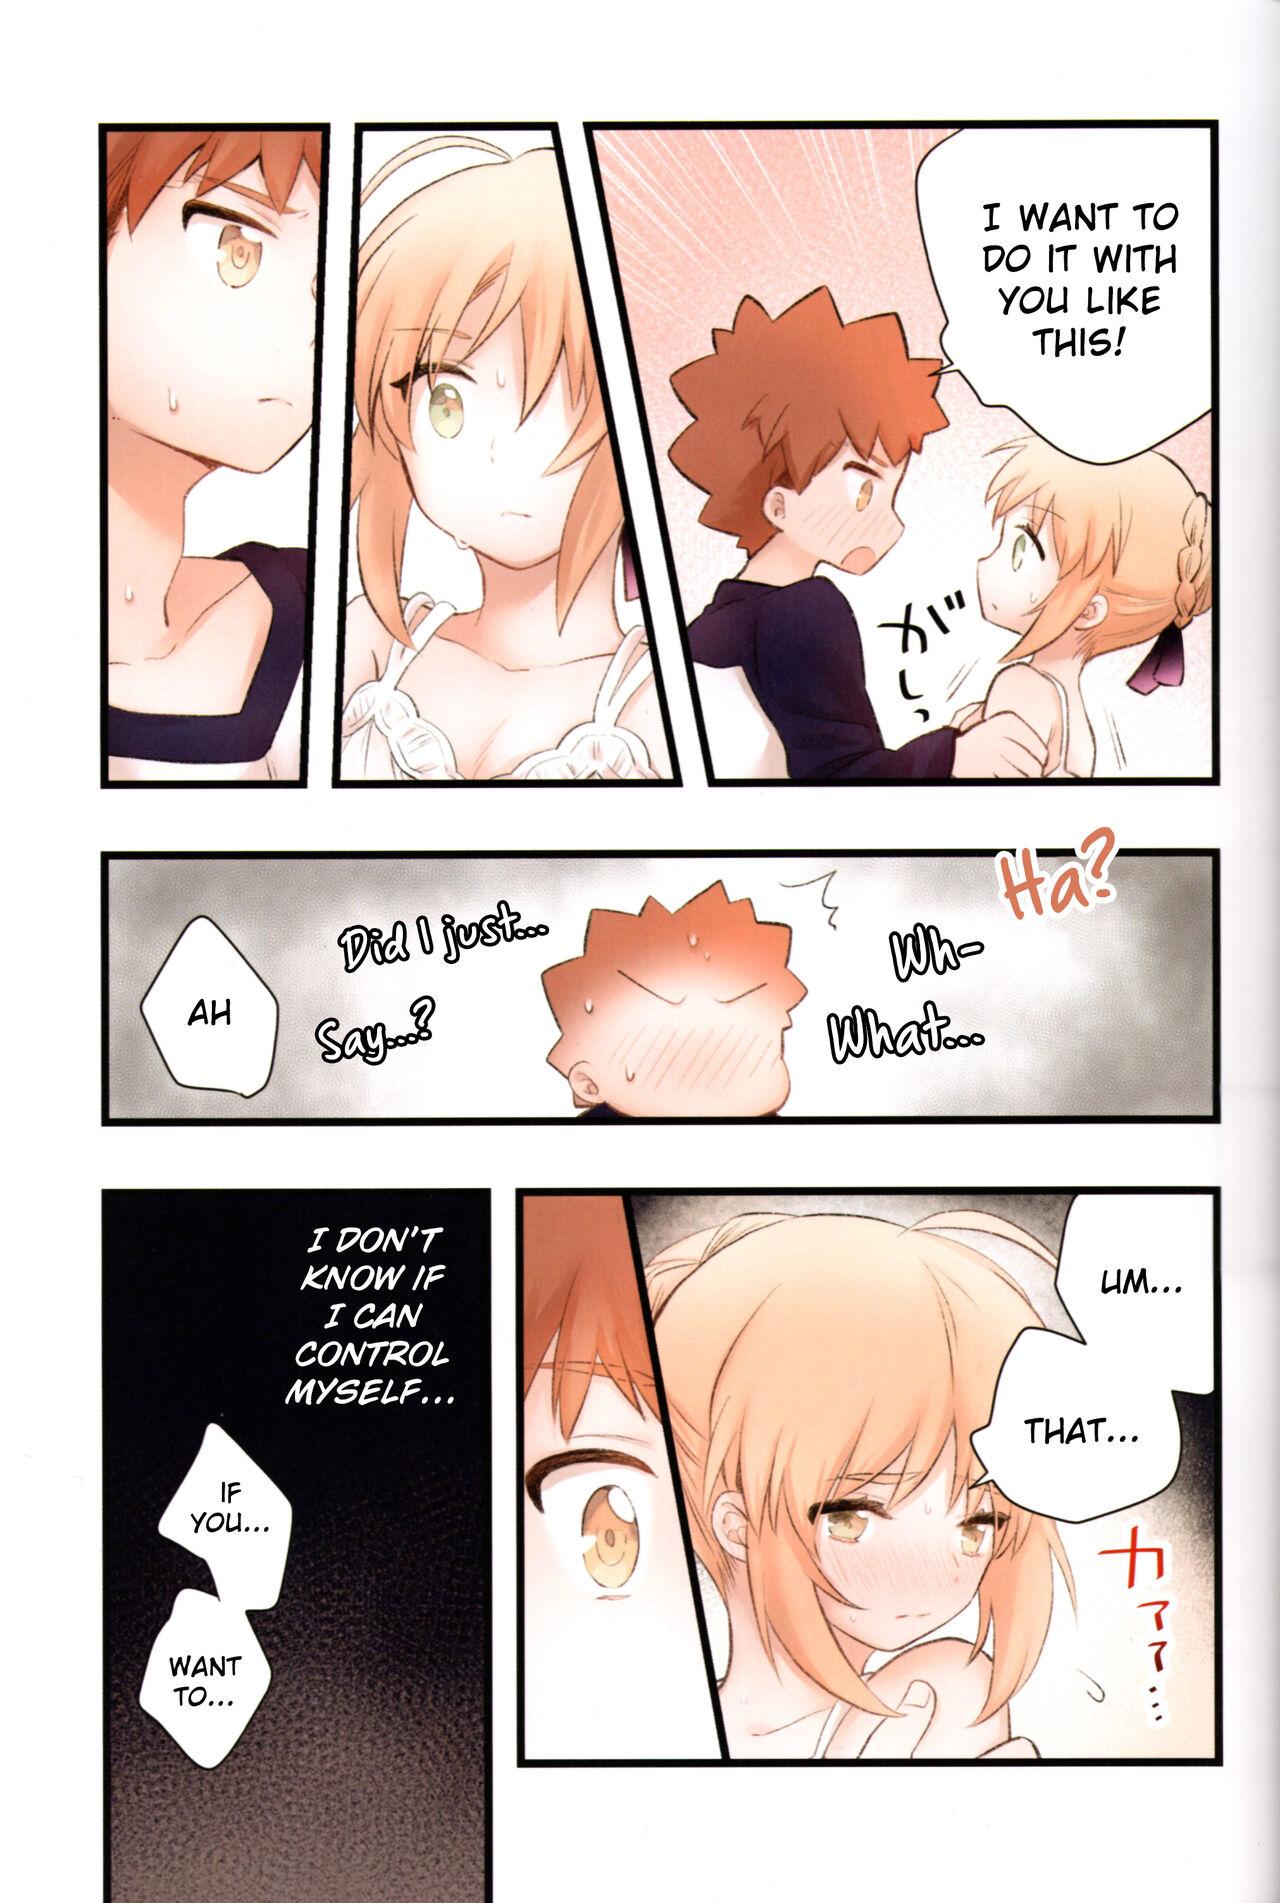 Ohmibod Souiu Shitagi wa Ore ni wa Hayai | This kind of underwear is too much for me. - Fate stay night First Time - Page 10